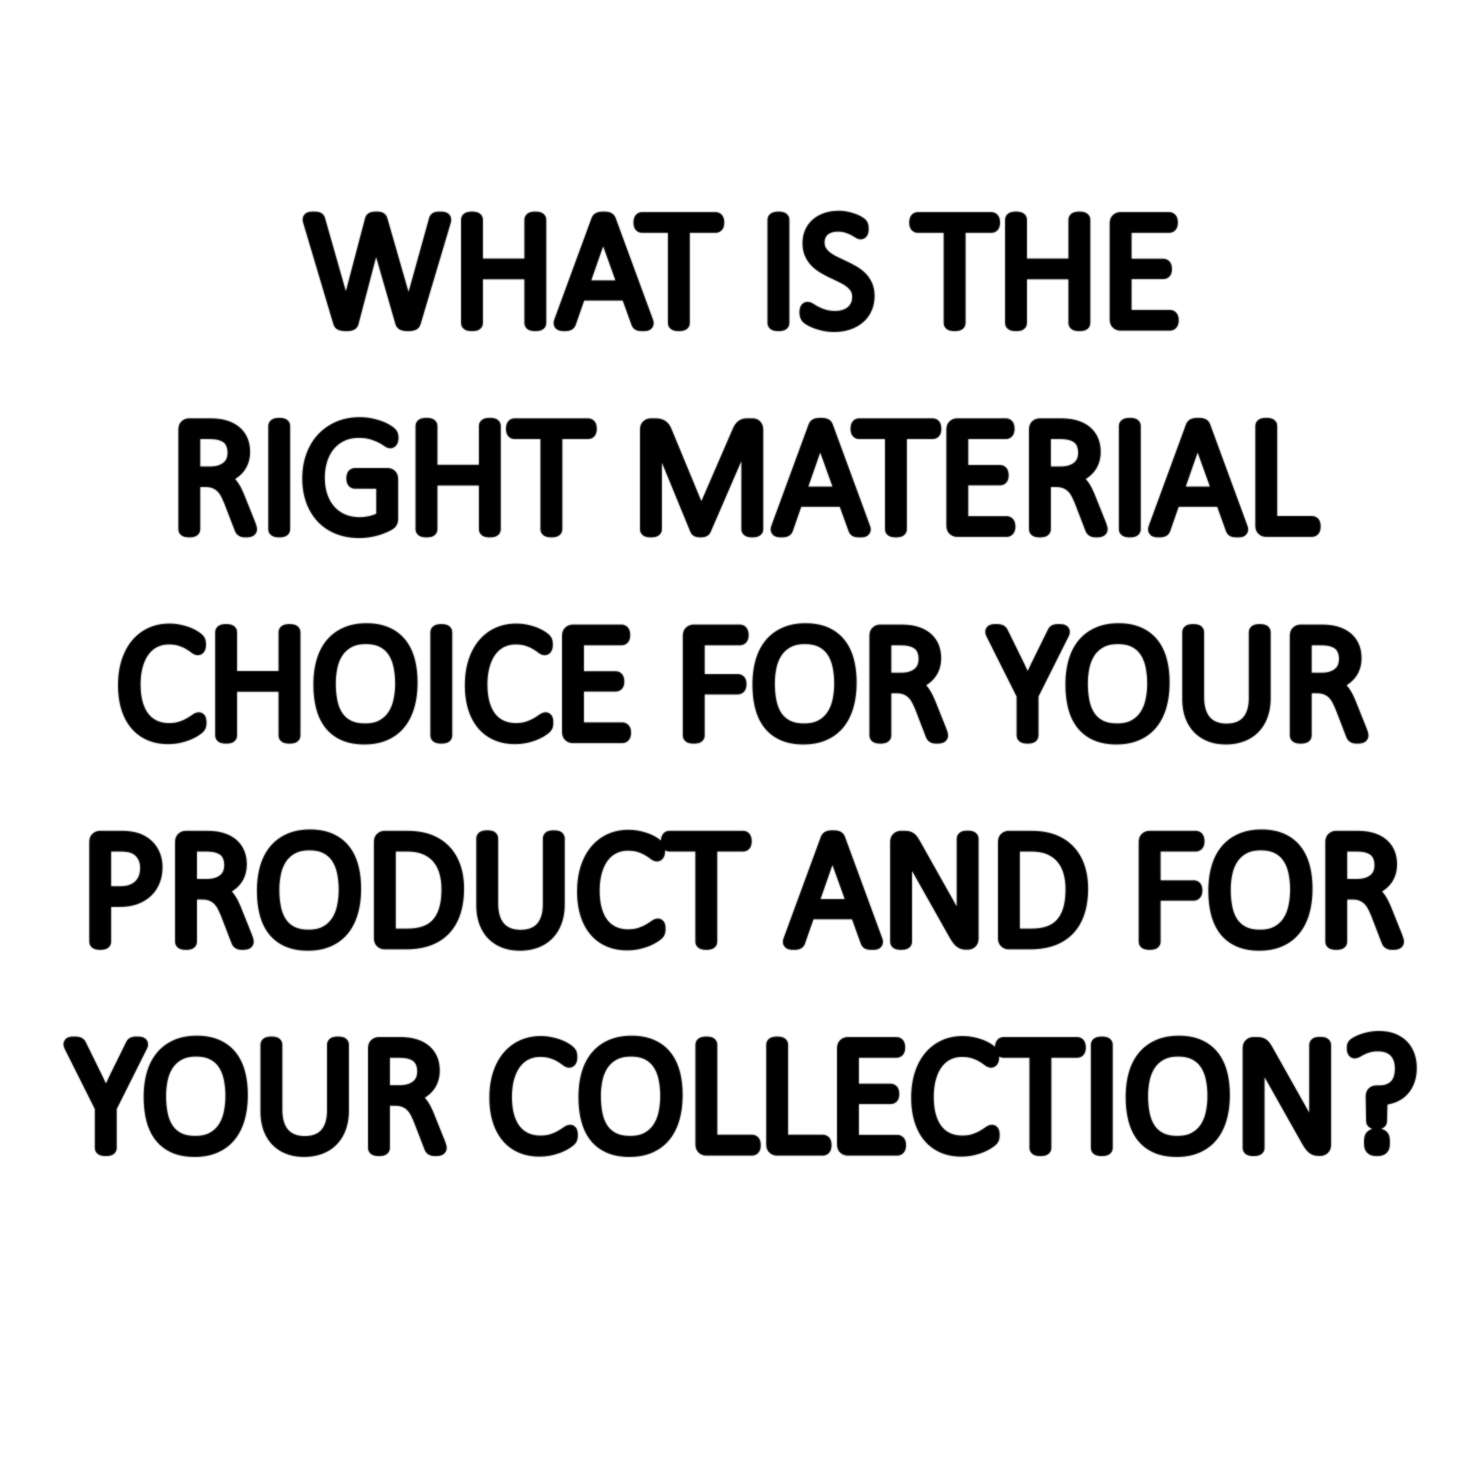 What is the right material choice for your product and for your collection?